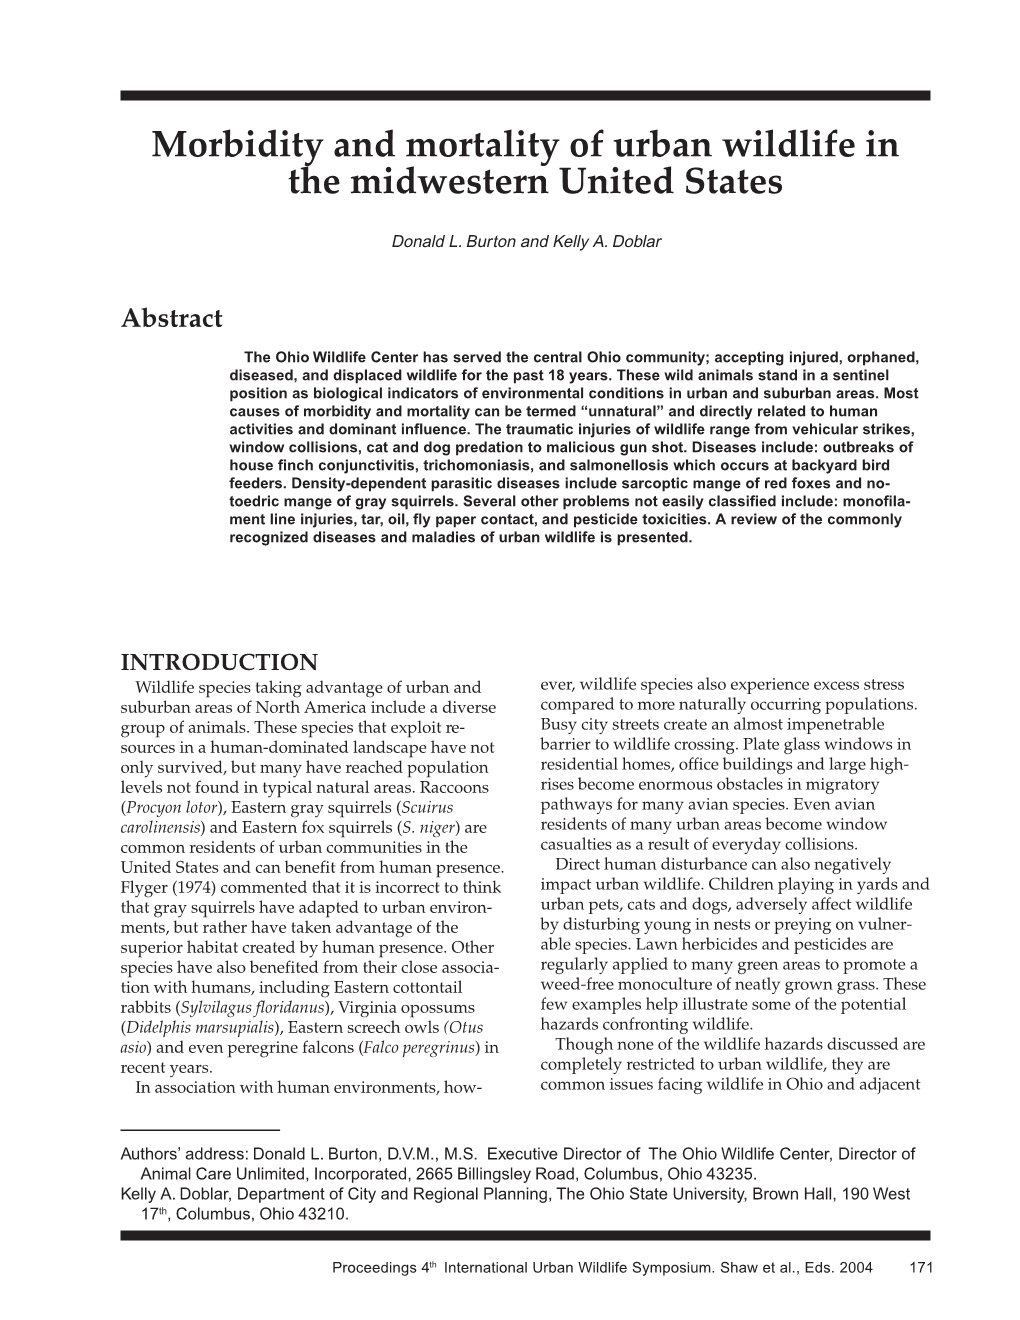 Morbidity and Mortality of Urban Wildlife in the Midwestern United States